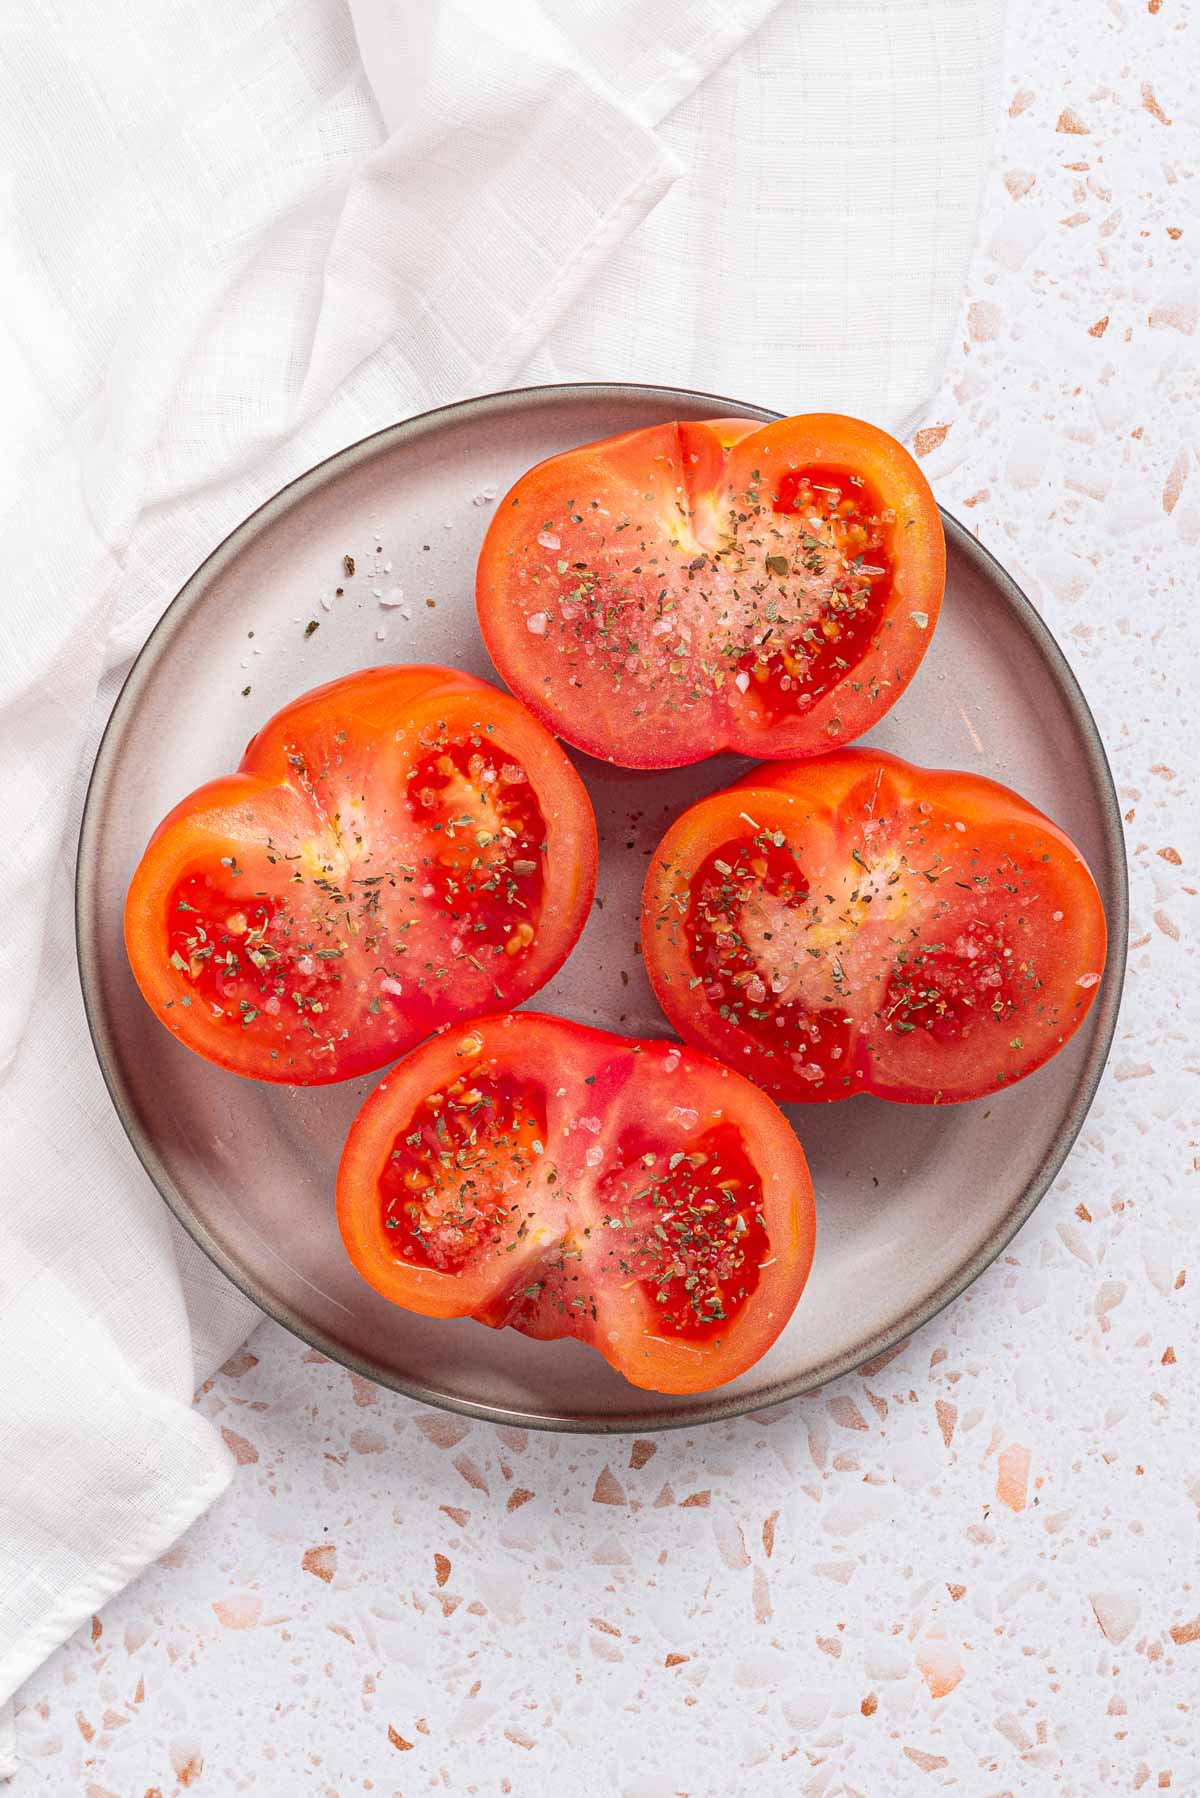 Sliced tomatoes on a plate on a white background.